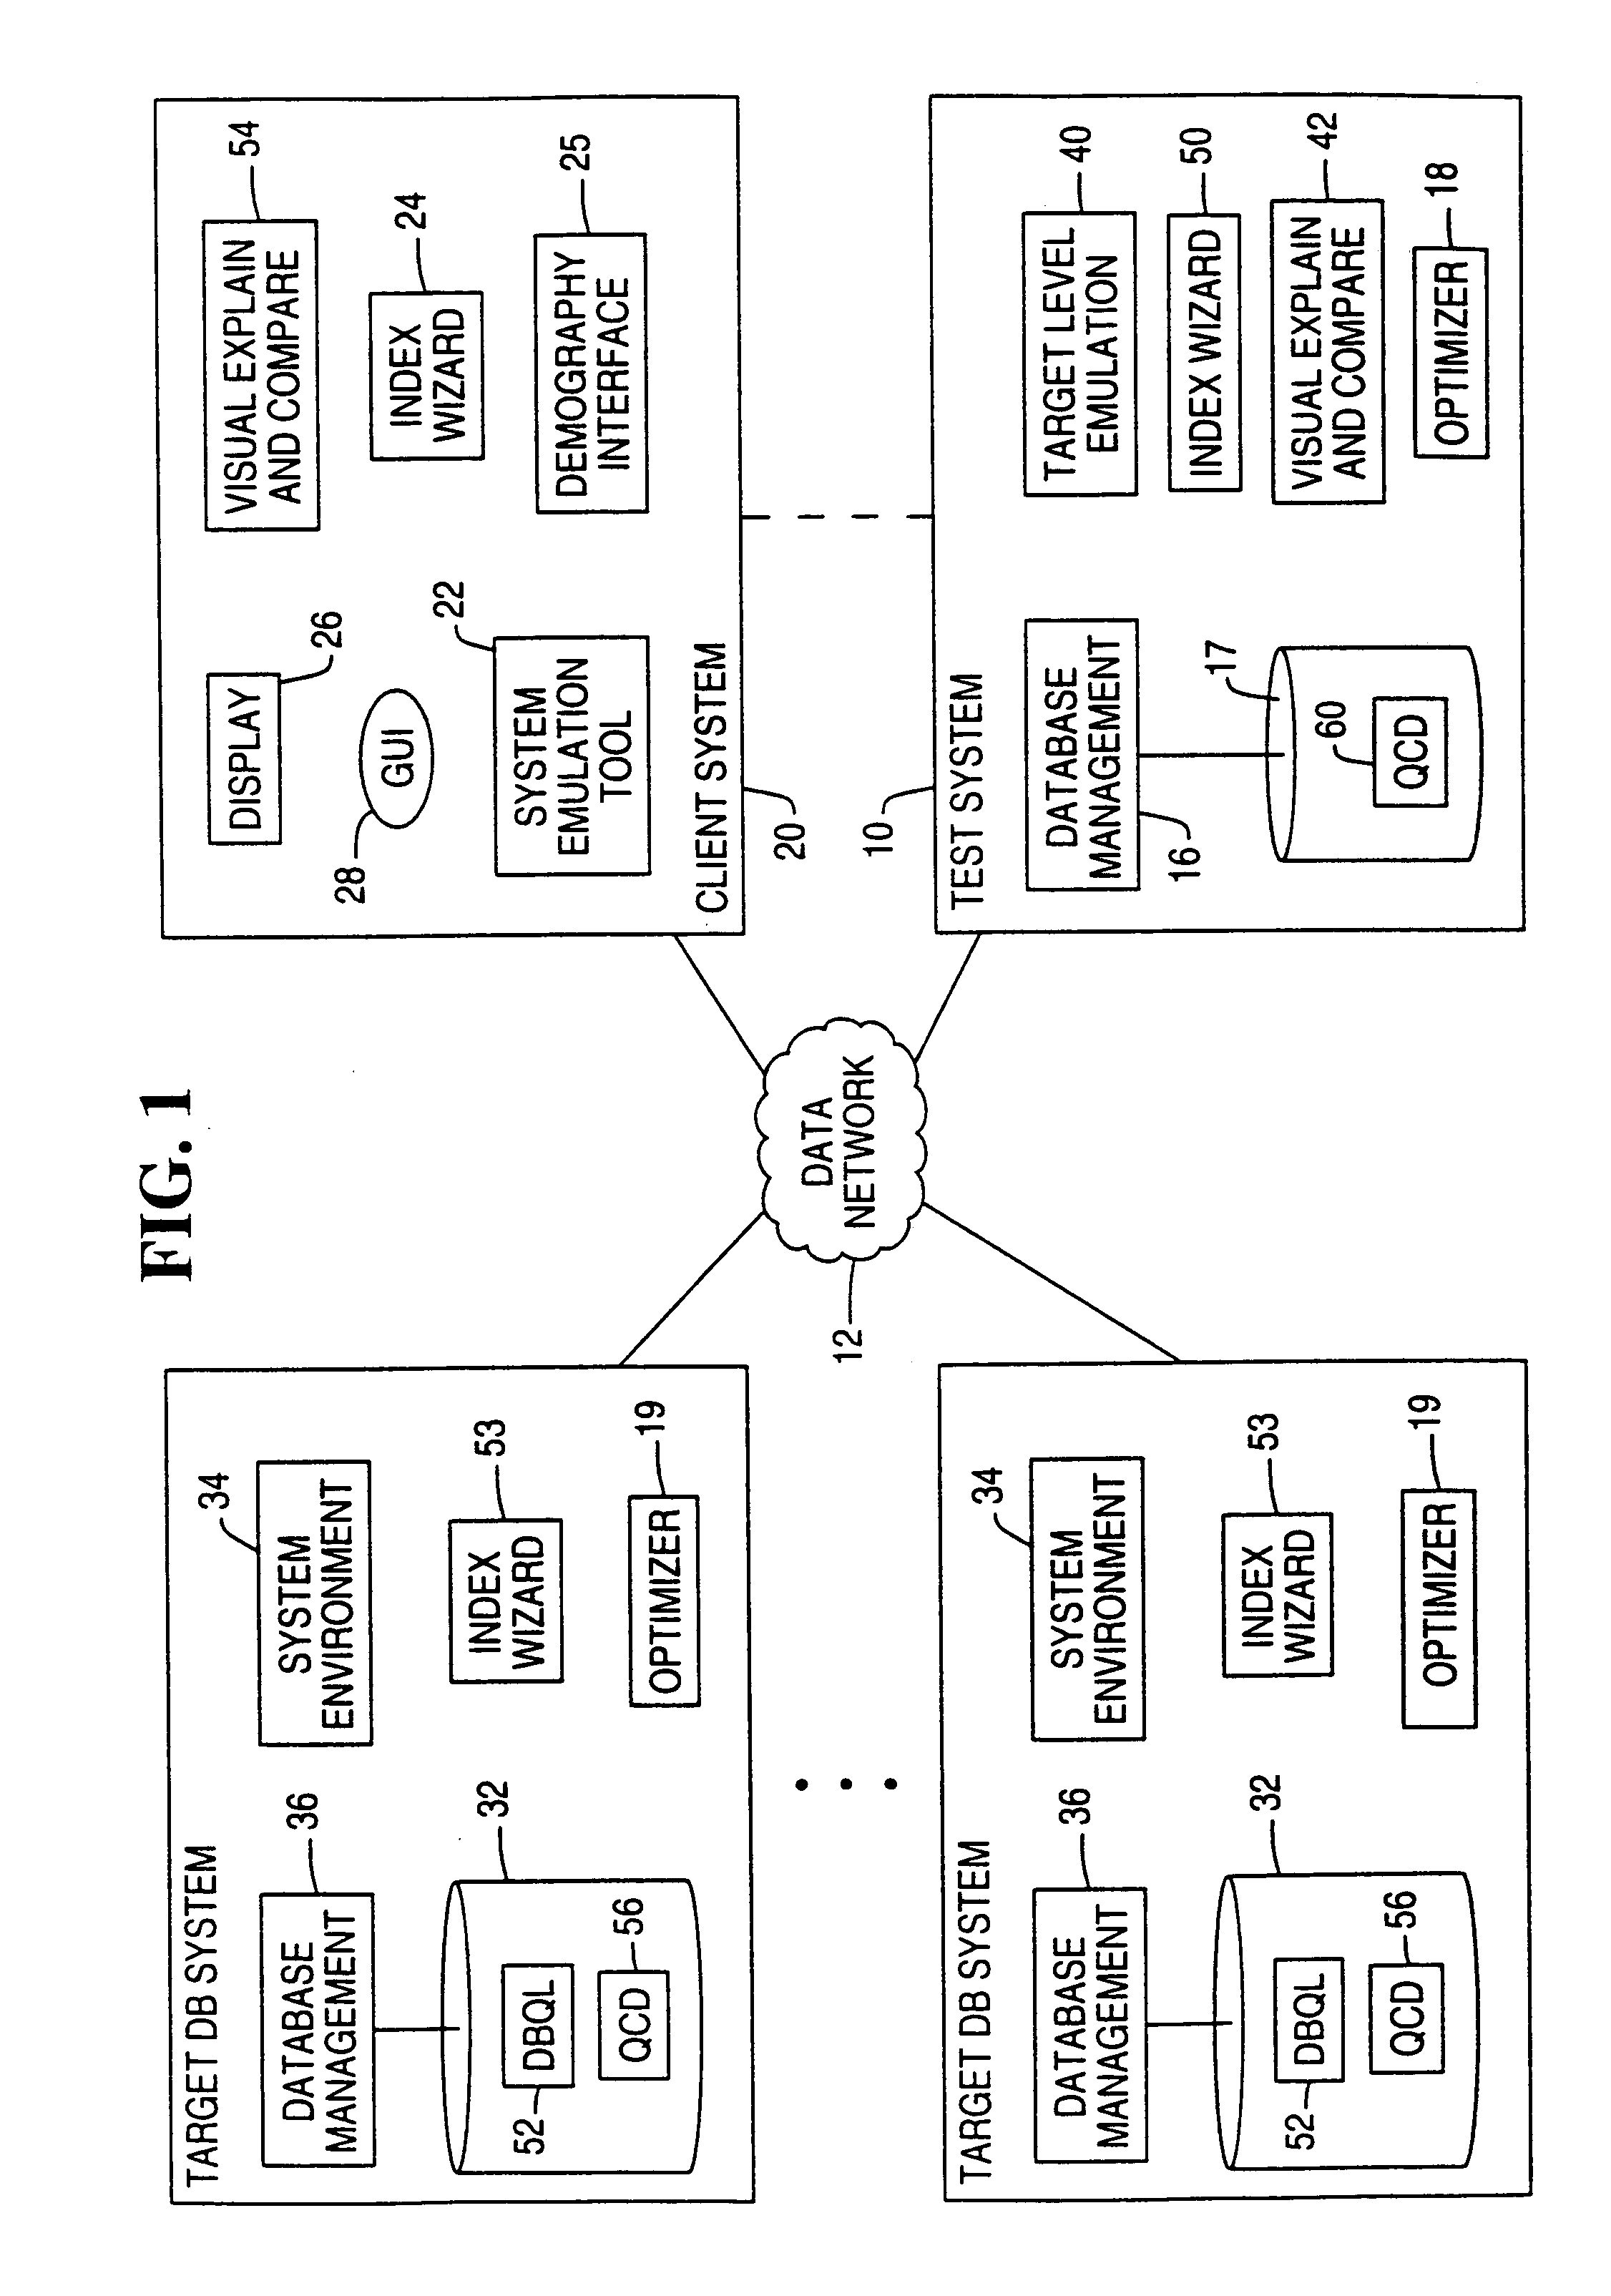 Index selection in a database system